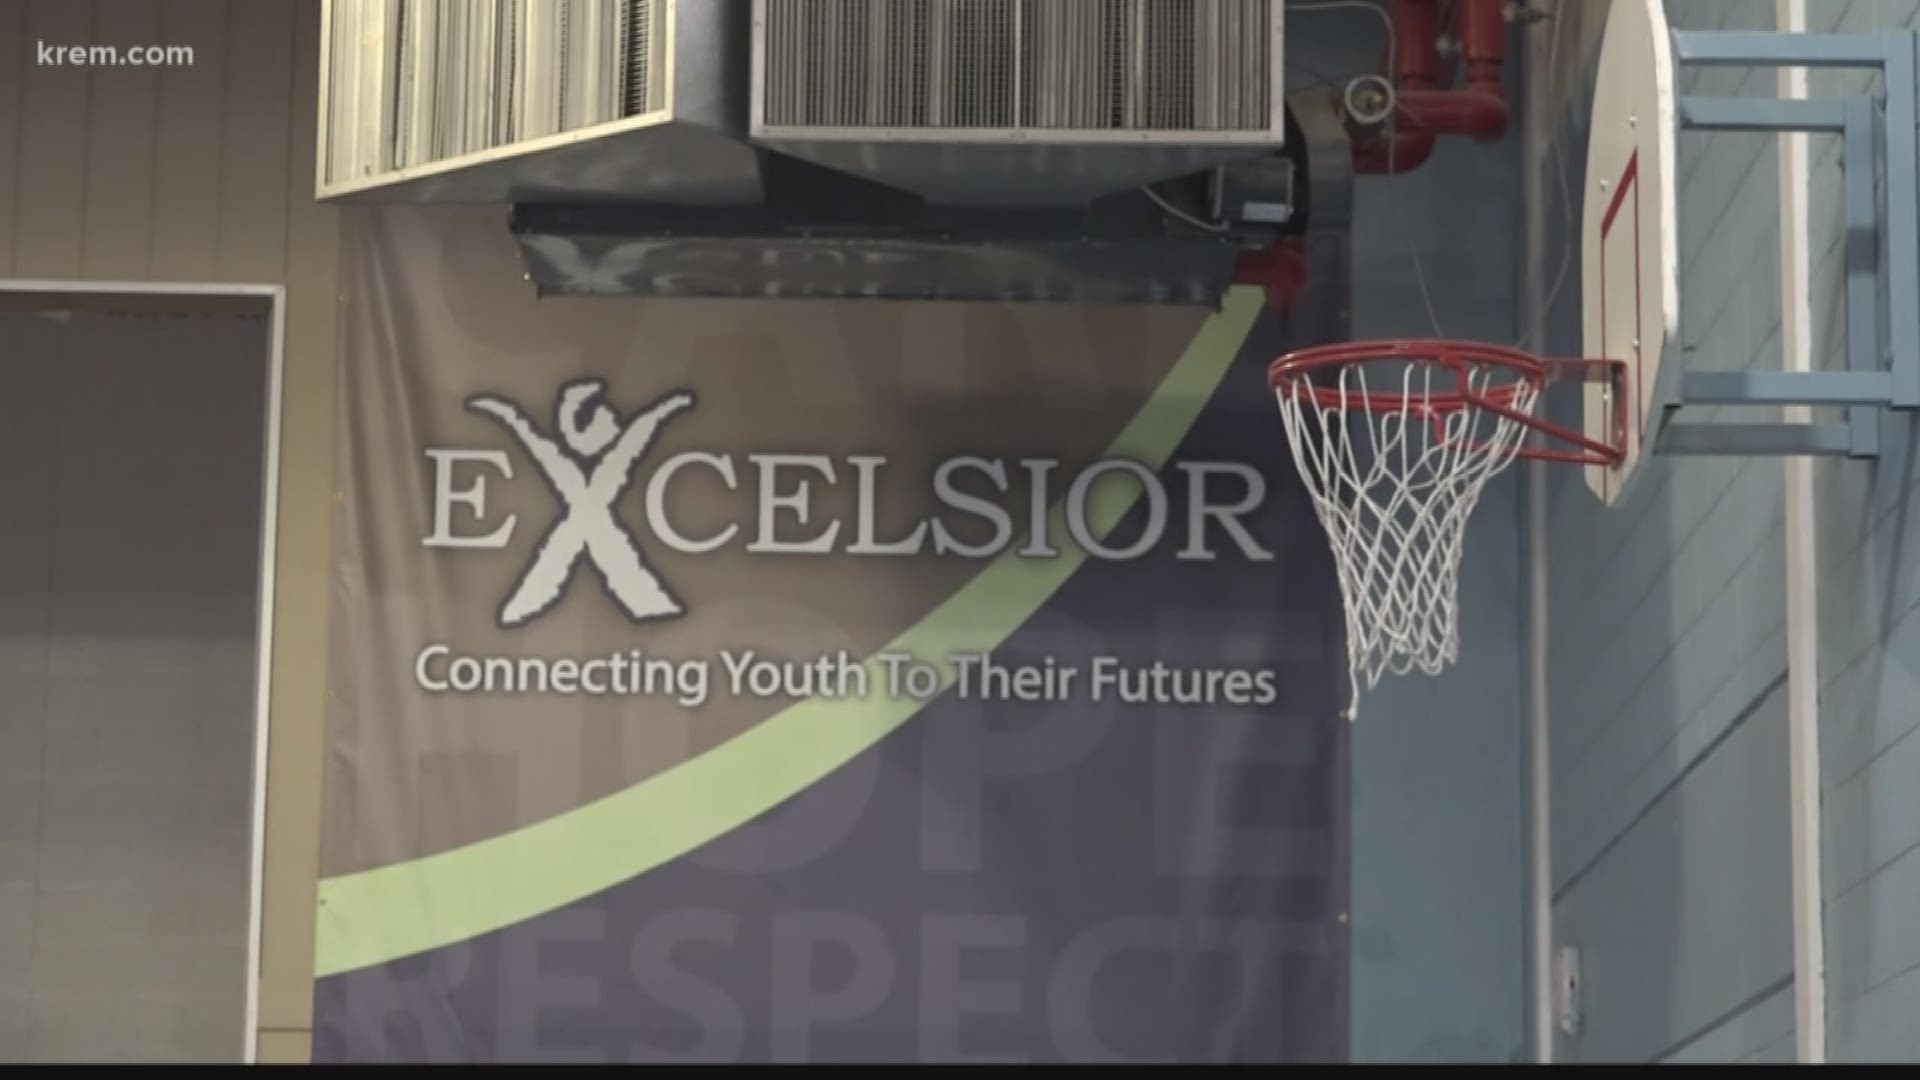 The Excelsior Wellness Center serves hundreds of vulnerable youth and their families each year. They are getting some much needed help from the state in their mission to provide behavioral health services to the Spokane community.